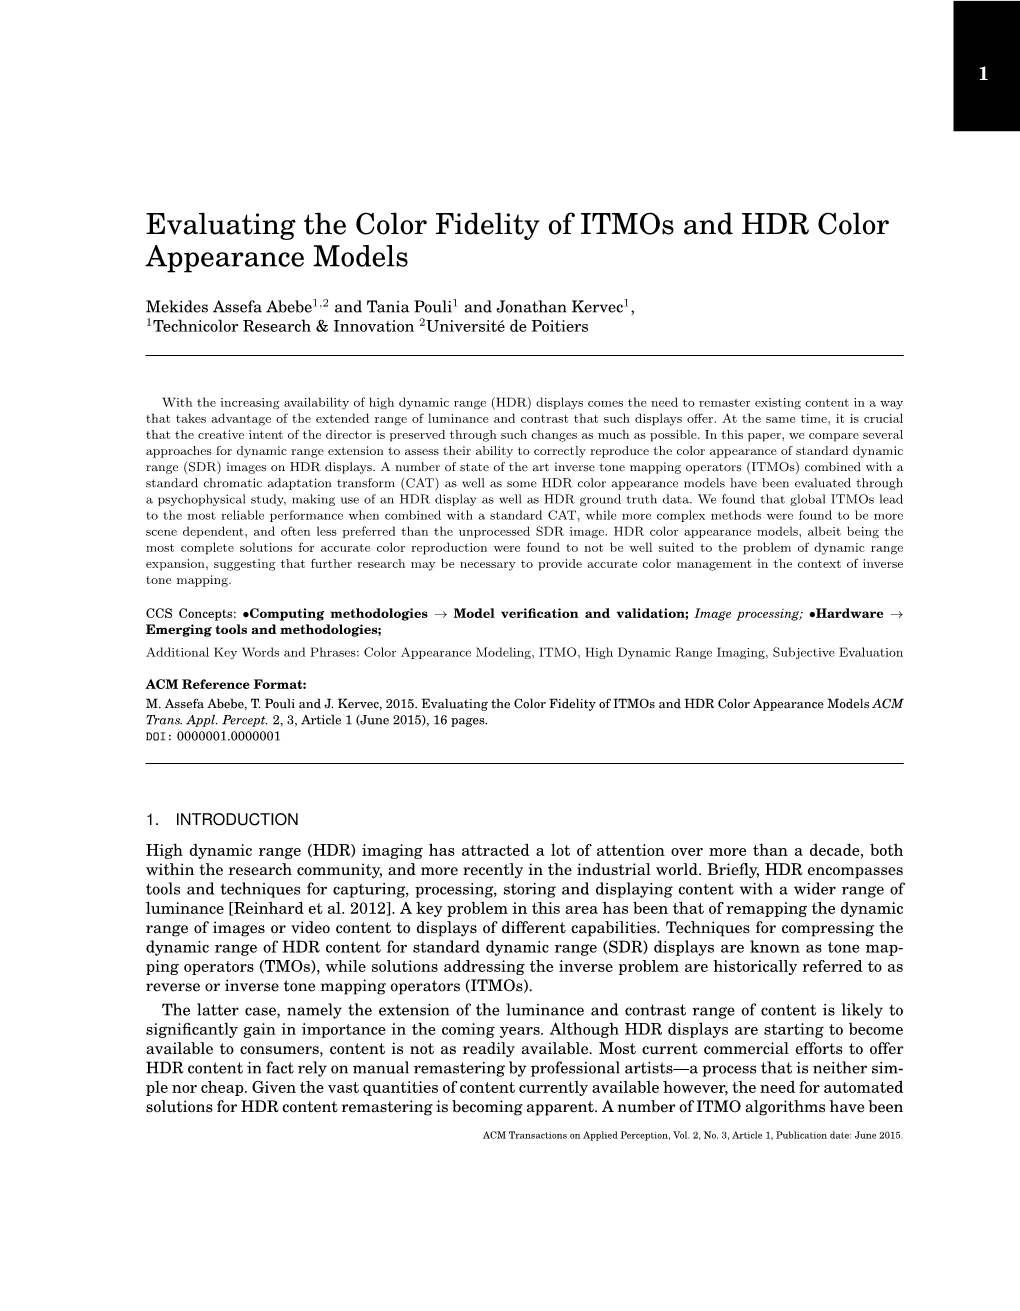 Evaluating the Color Fidelity of Itmos and HDR Color Appearance Models